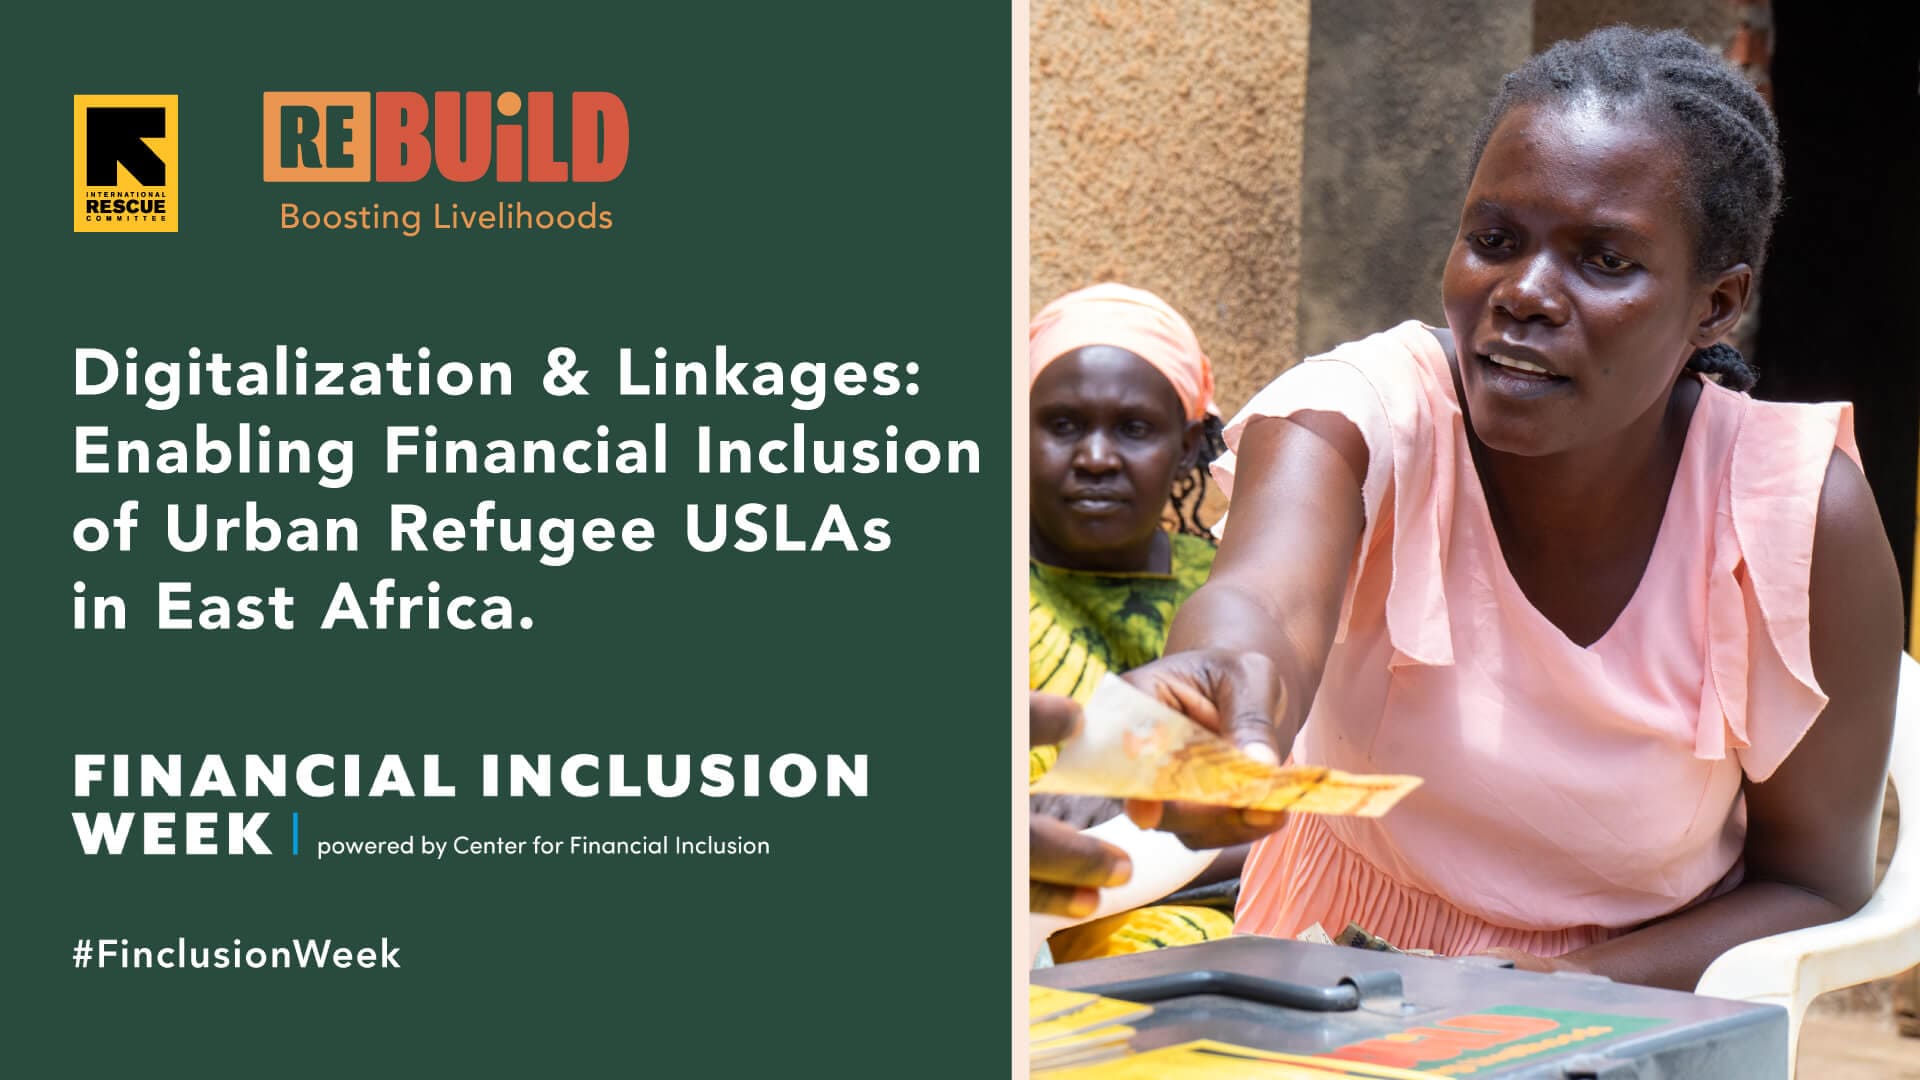 Digitalization & Linkages Enabling Financial Inclusion of Urban Refugee Urban Savings and Loans Associations (USALs) in East Africa - Re:BUiLD